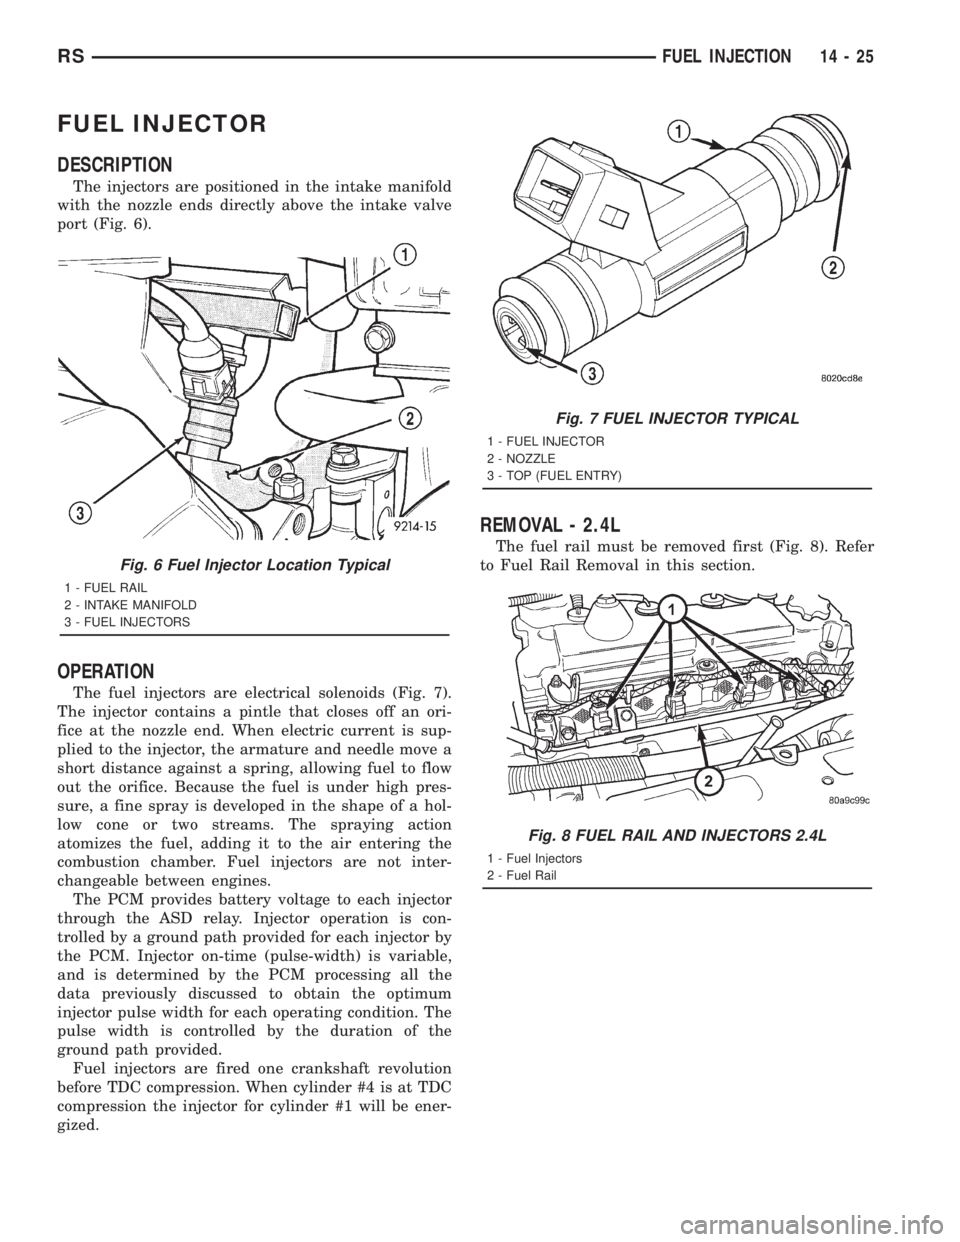 CHRYSLER VOYAGER 2001  Service Manual FUEL INJECTOR
DESCRIPTION
The injectors are positioned in the intake manifold
with the nozzle ends directly above the intake valve
port (Fig. 6).
OPERATION
The fuel injectors are electrical solenoids 